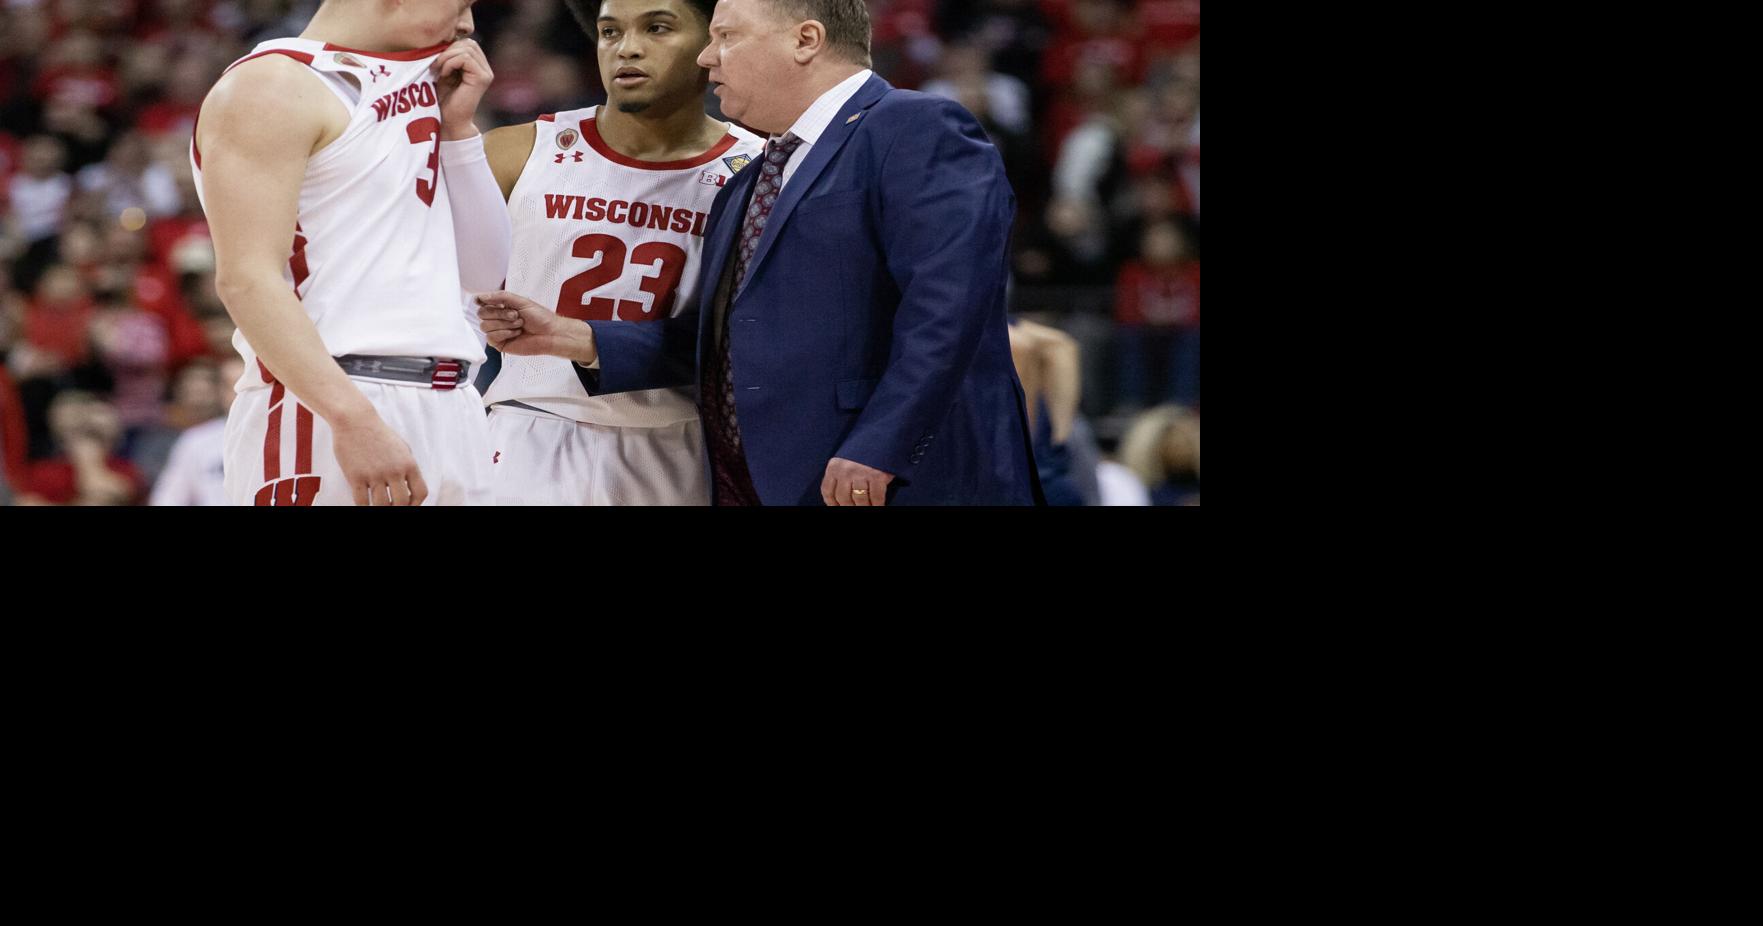 Inside the Badgers war room, a battle plan for basketball transfers